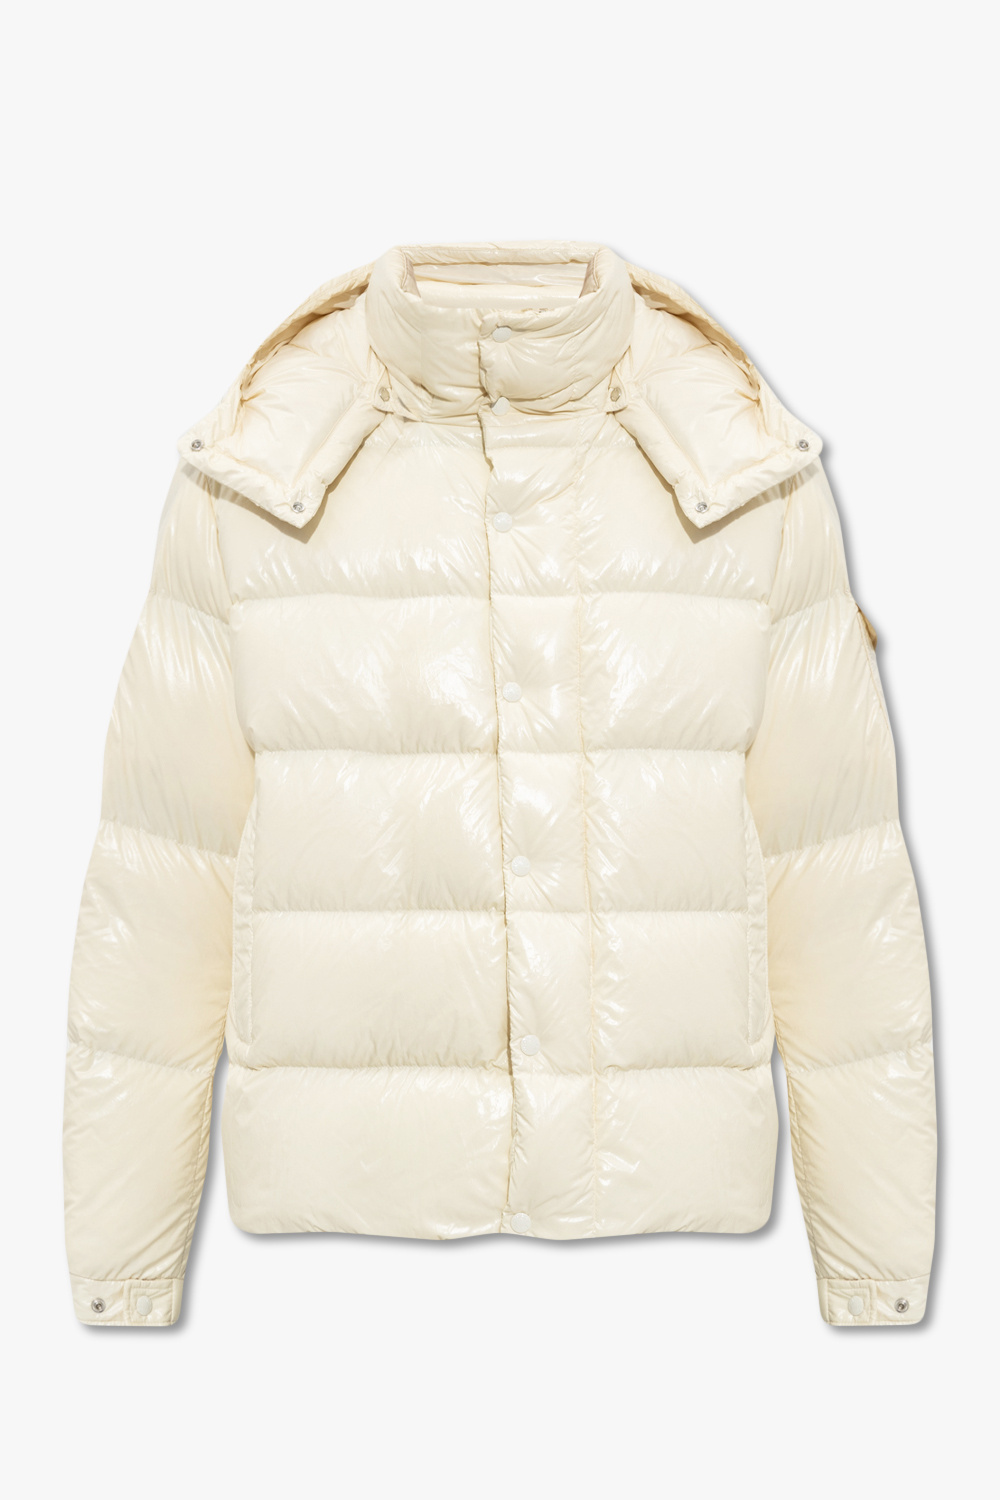 Moncler Paper jacket from ‘MONCLER 70th ANNIVERSARY’ limited collection